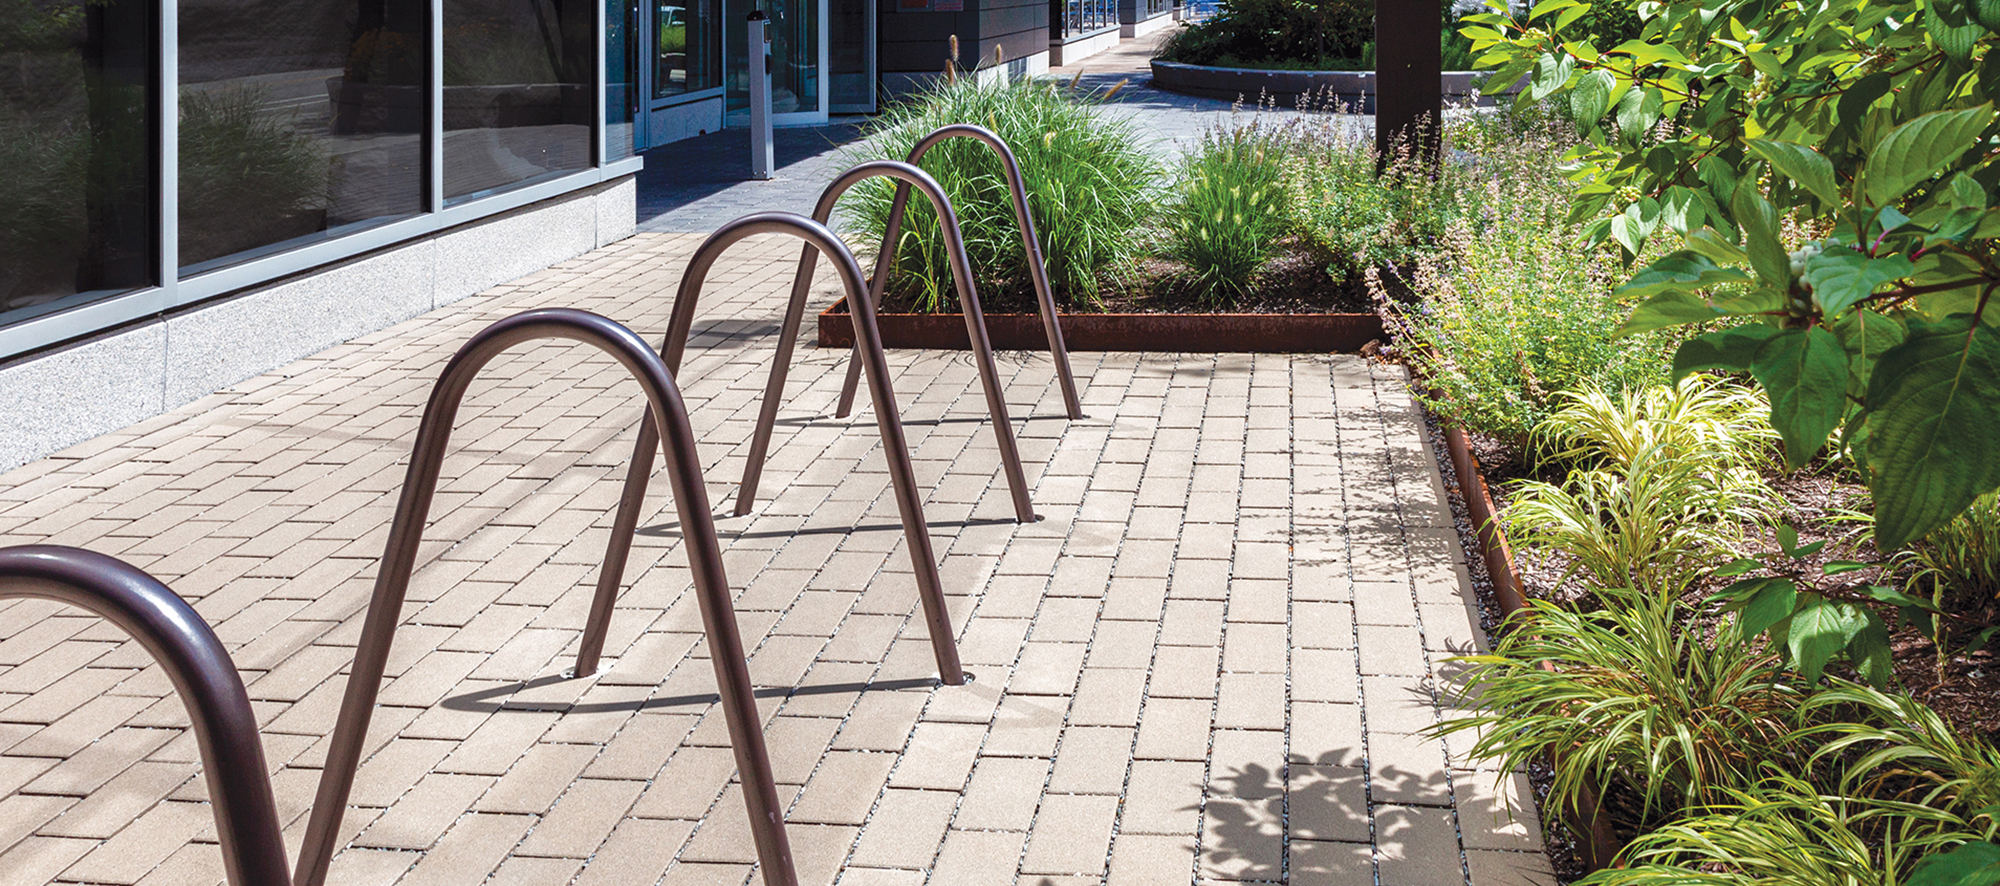 Unilock Eco-Priora permeable pavers in front of a building with bike racks and gardens.